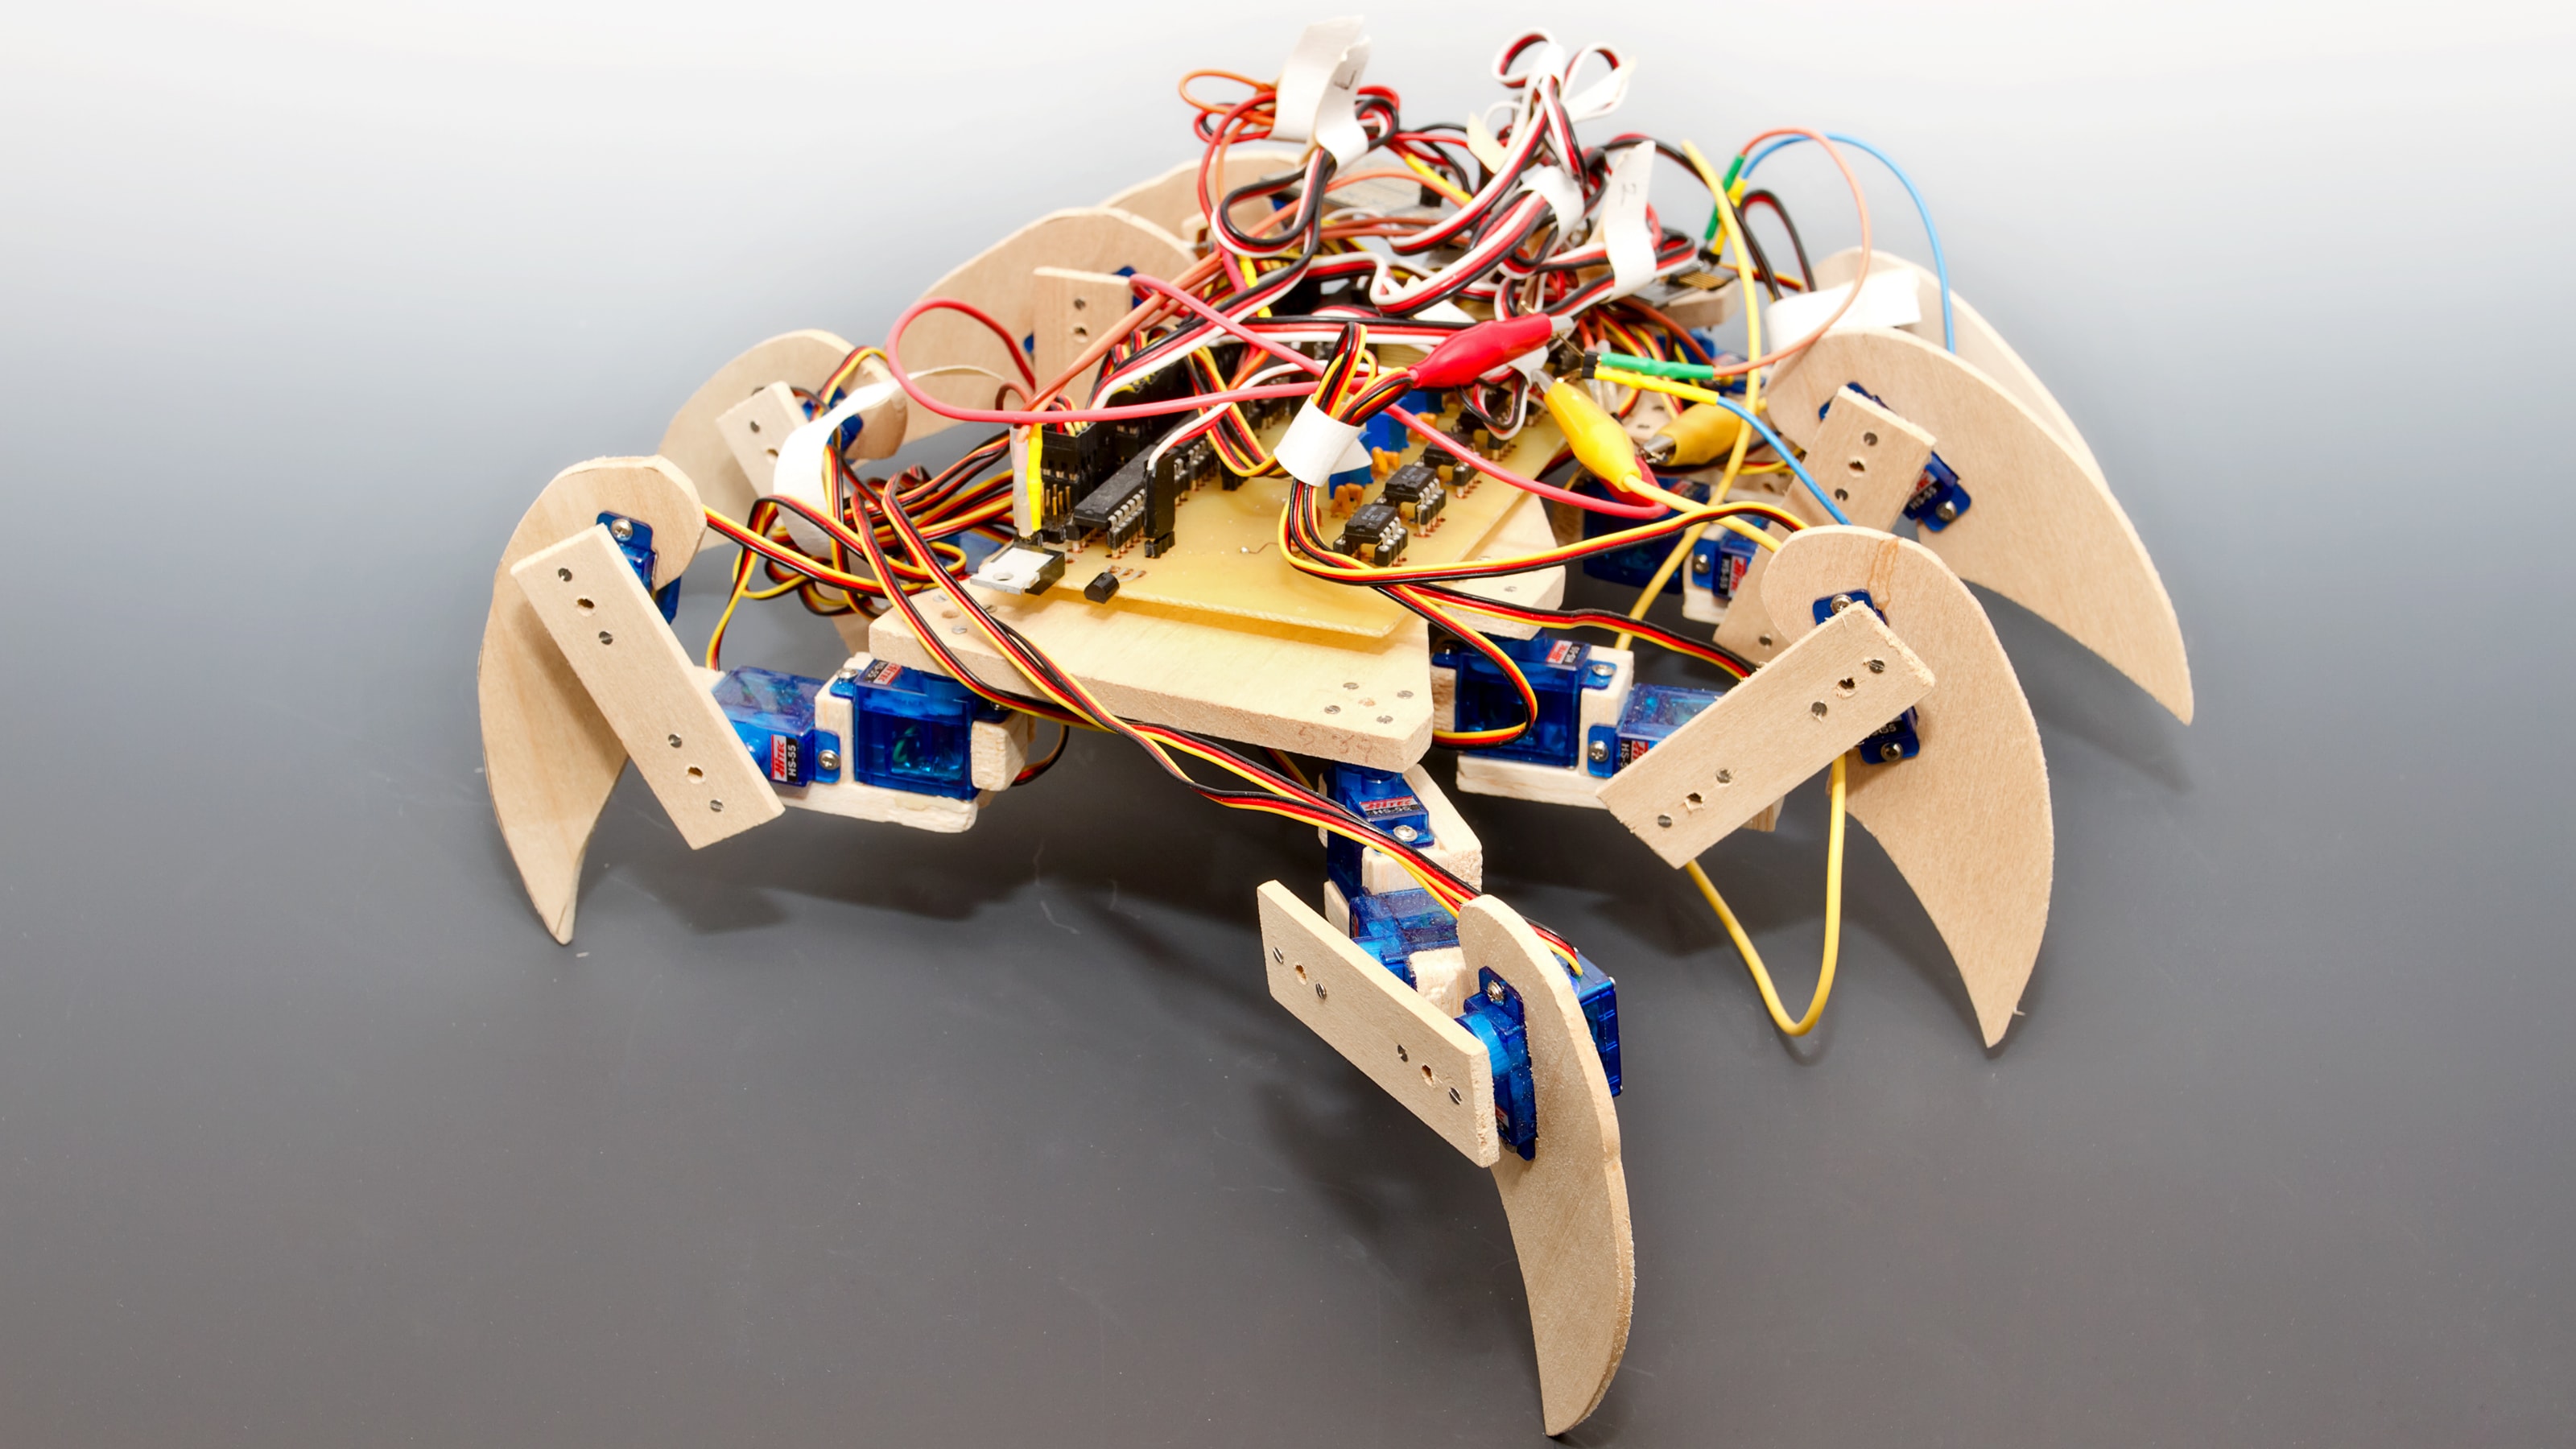 An eight-legged scorpion-like robot with exposed circuits.